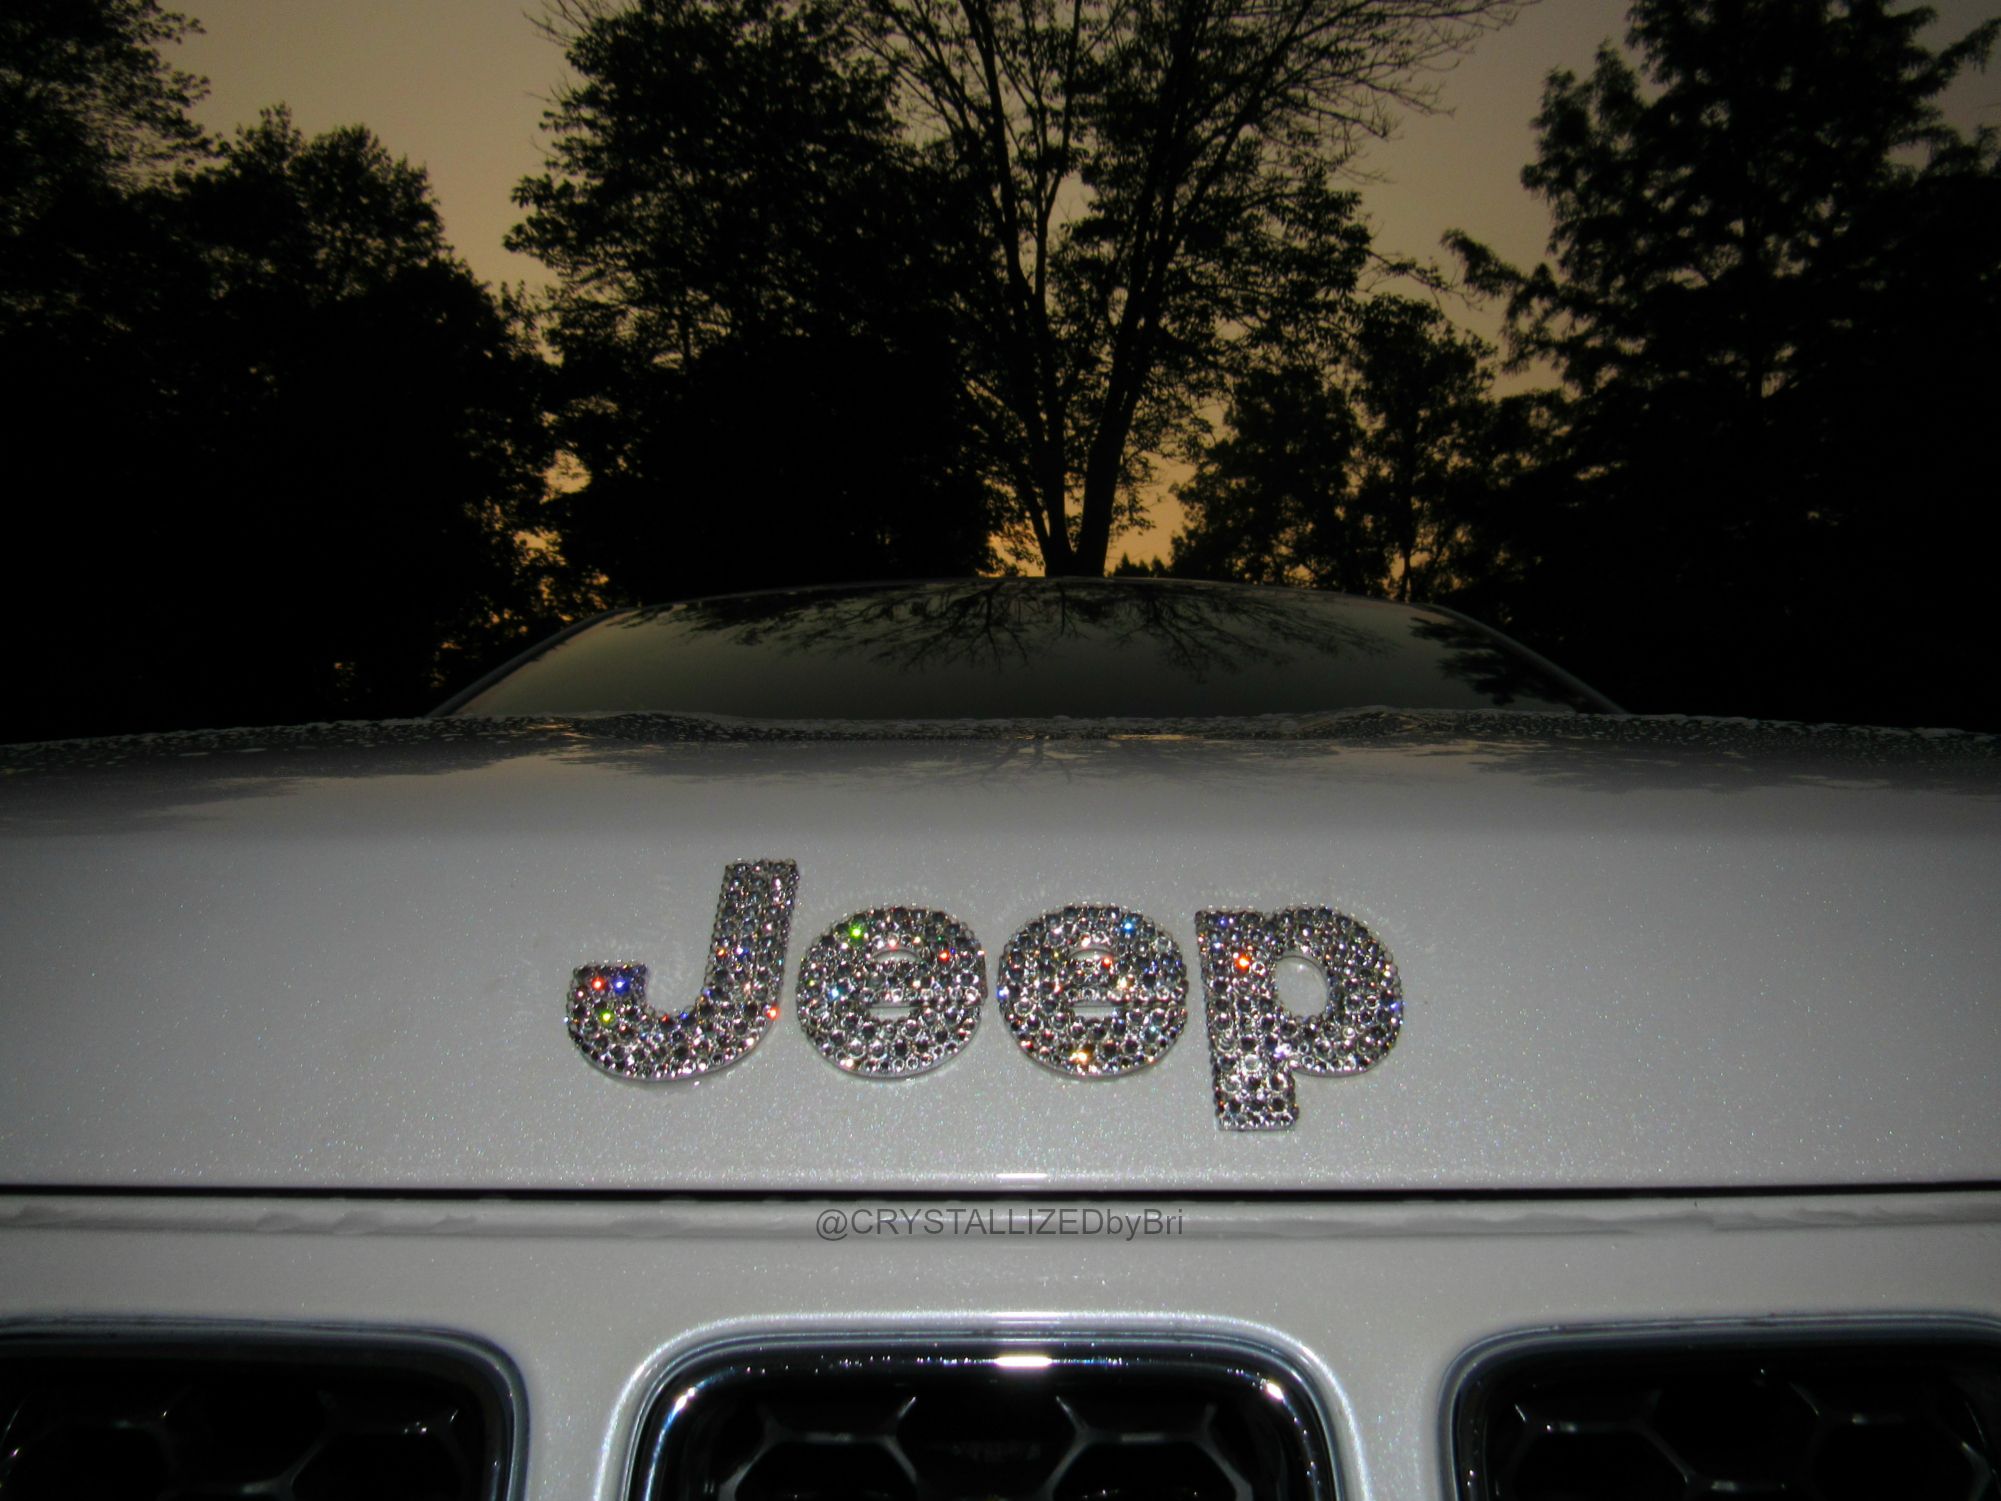 Buy Hand Crafted Jeep Crystallized Car Emblem Letters Bling Genuine  European Crystals Bedazzled, made to order from CRYSTALL!ZED by Bri, LLC |  